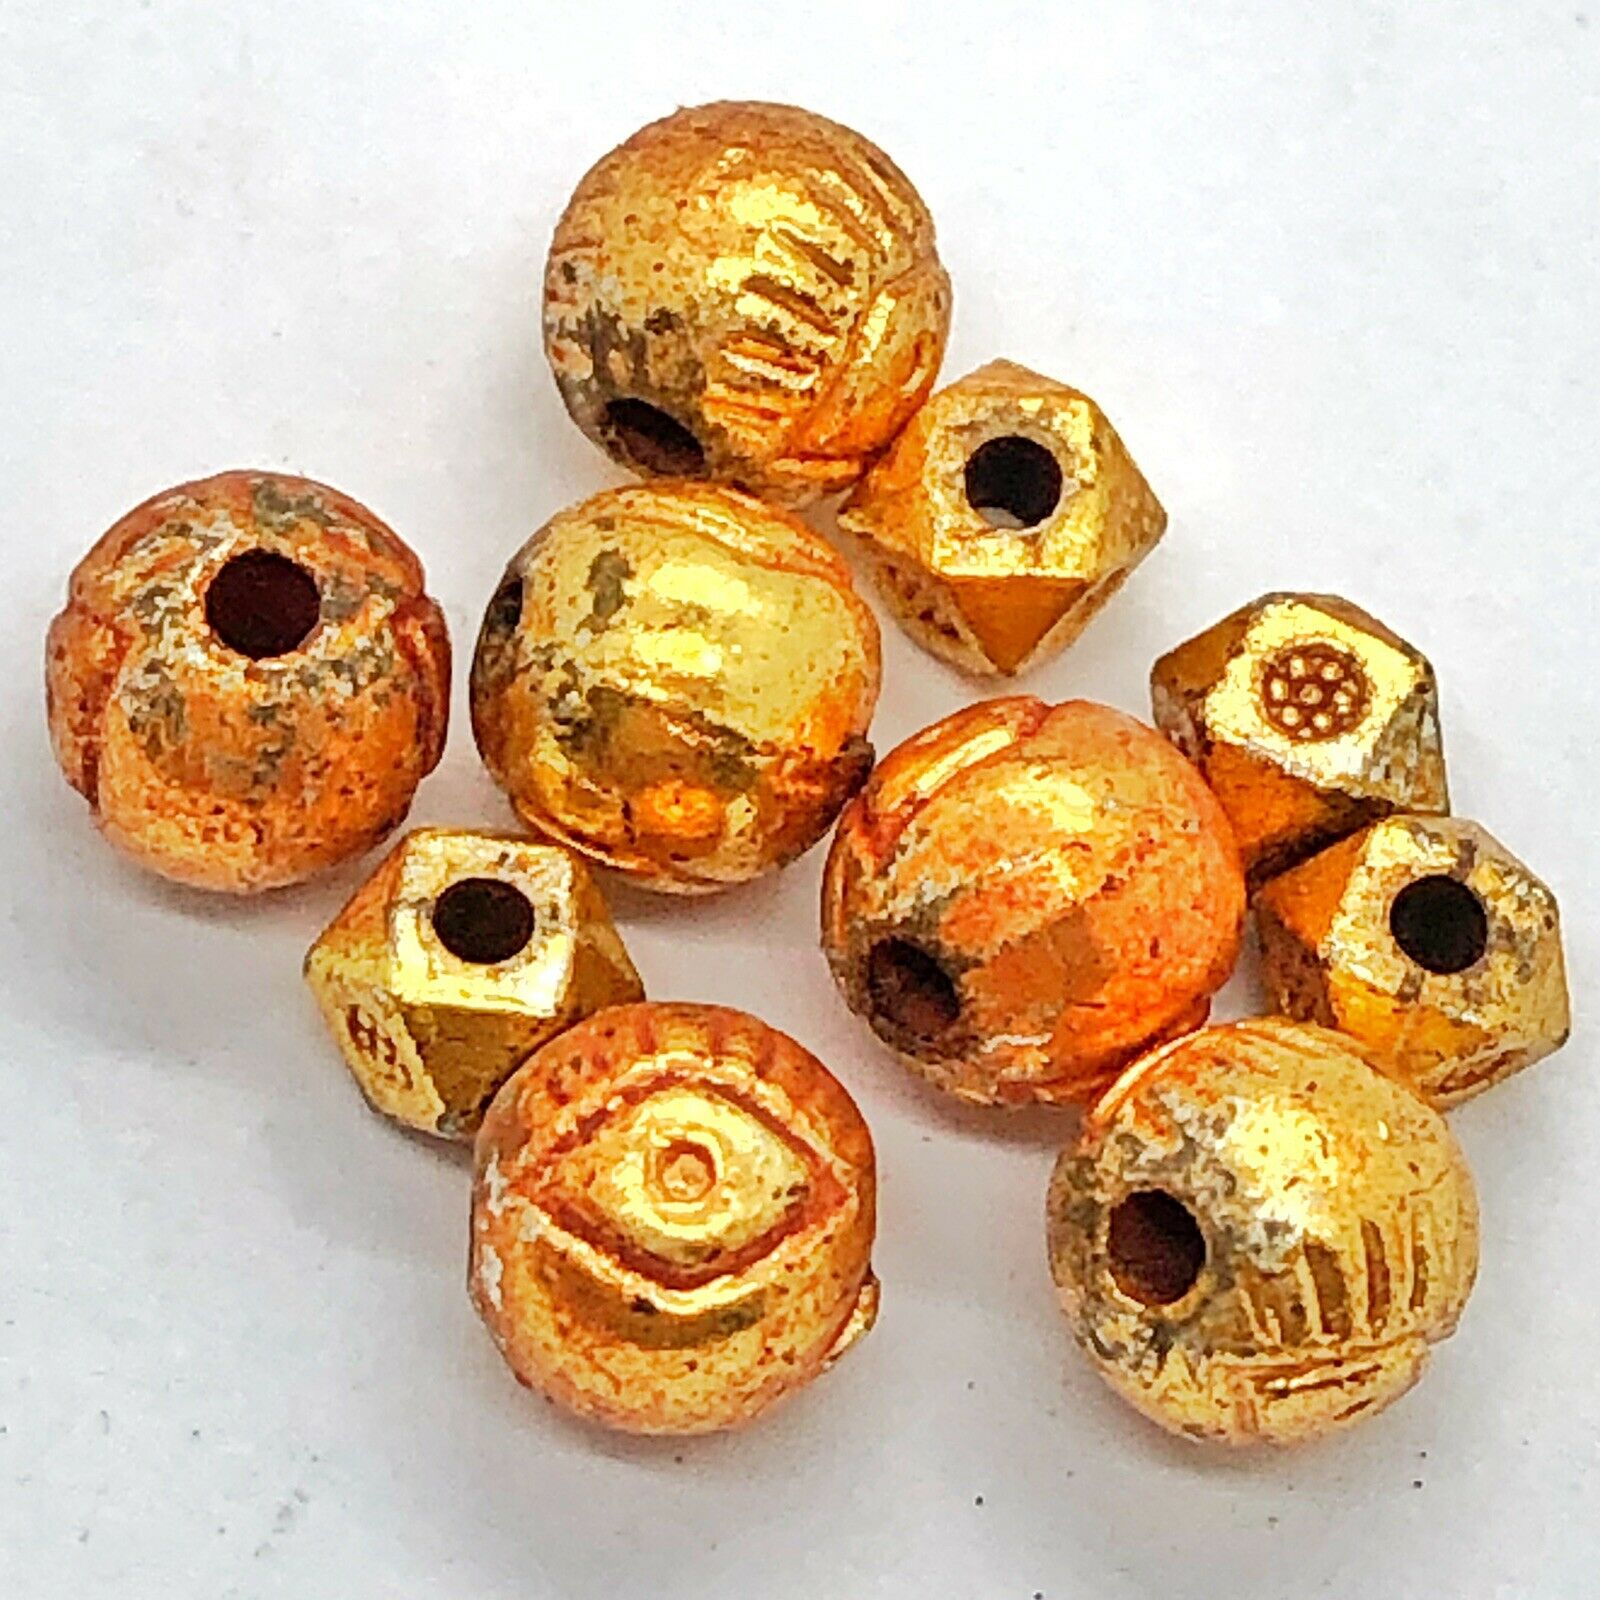 10 Post Medieval Metal European Beads With Thin Gold Gilding - Circa 1600-1800’s